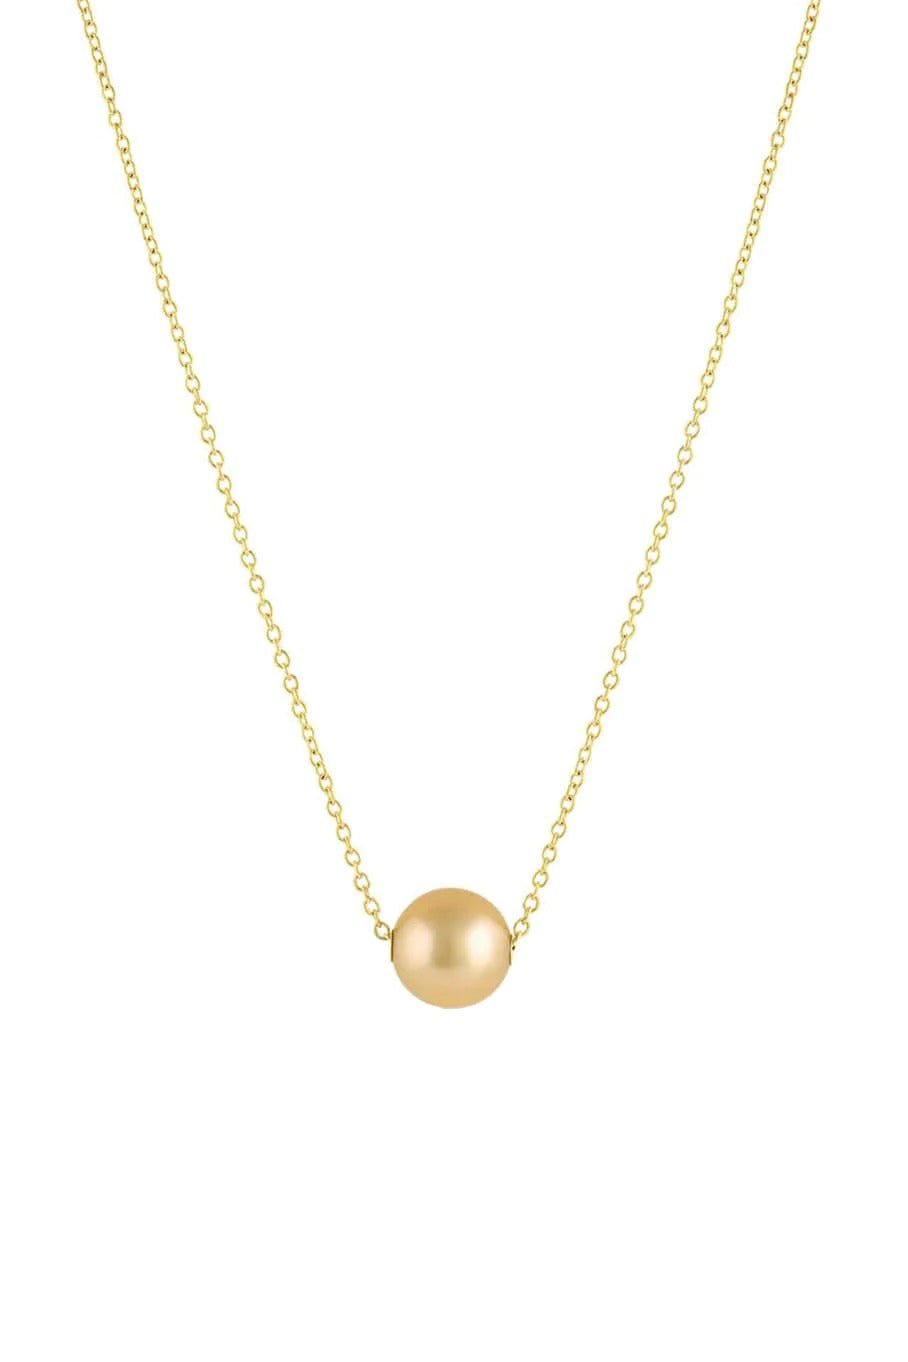 BAGGINS-Sliding Golden South Sea Pearl Necklace-YELLOW GOLD